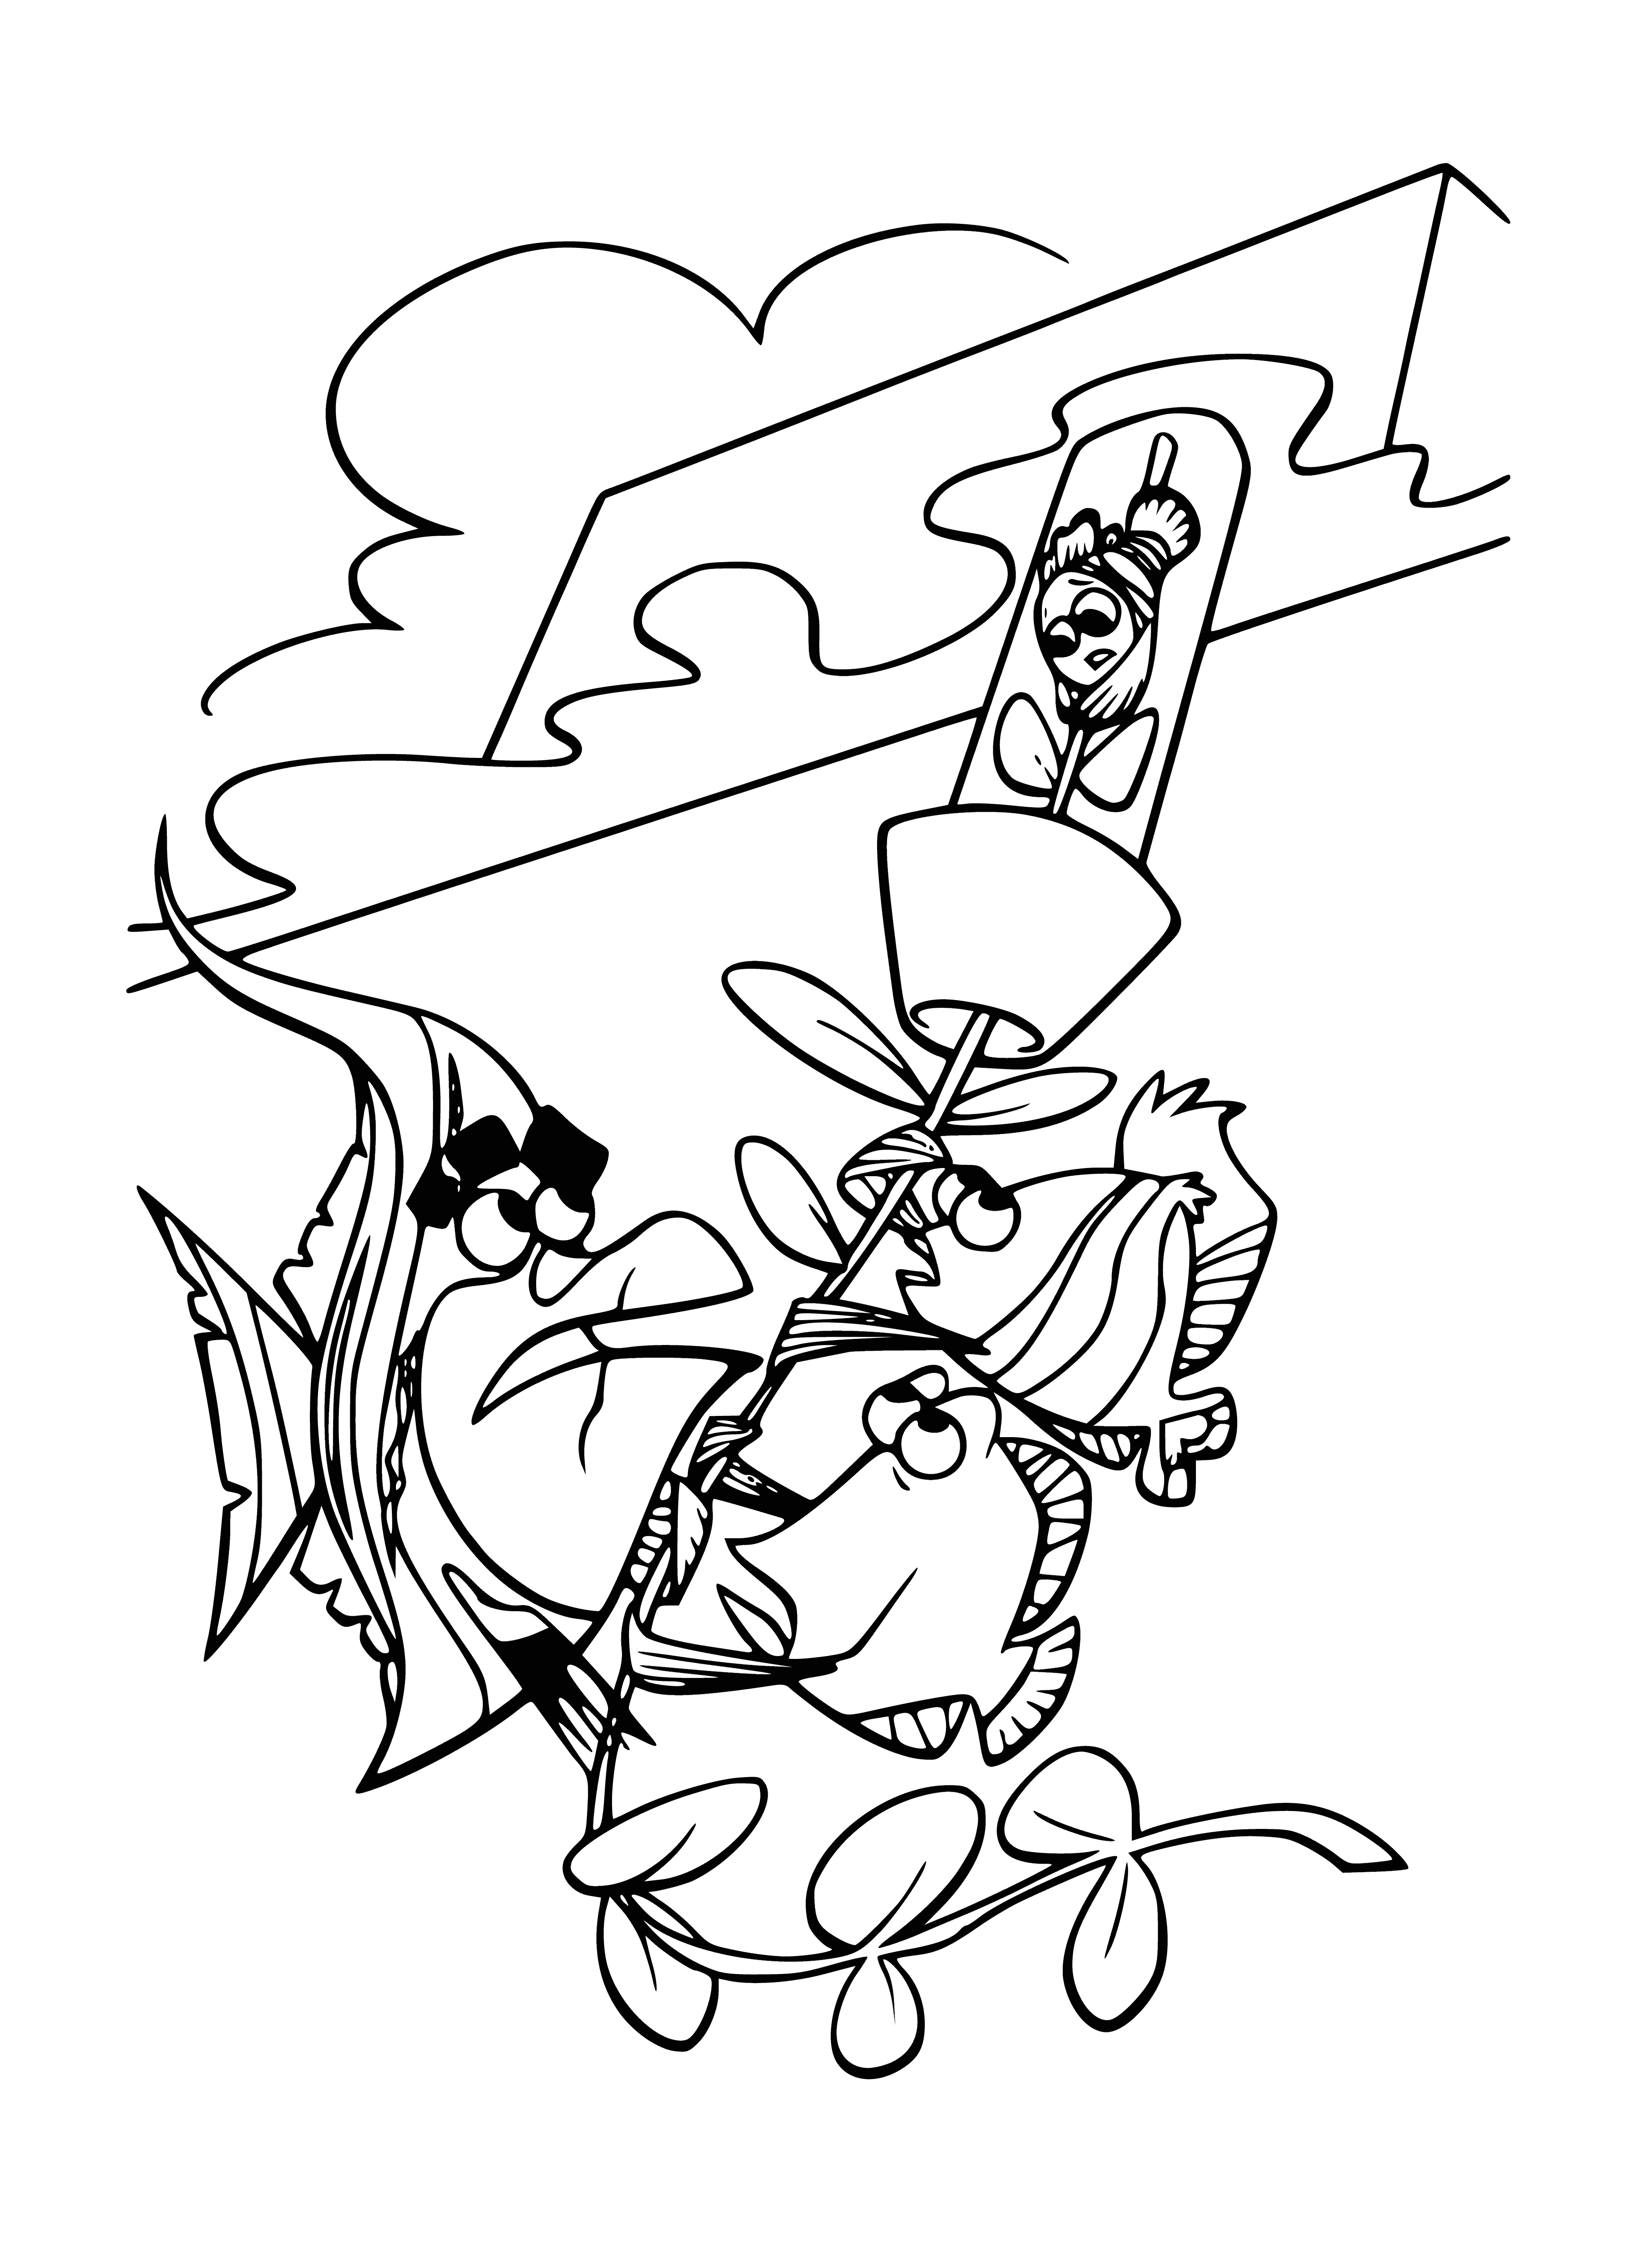 coloring page: Marlin fears for Nemo's safety as he swims into the whale's open mouth.